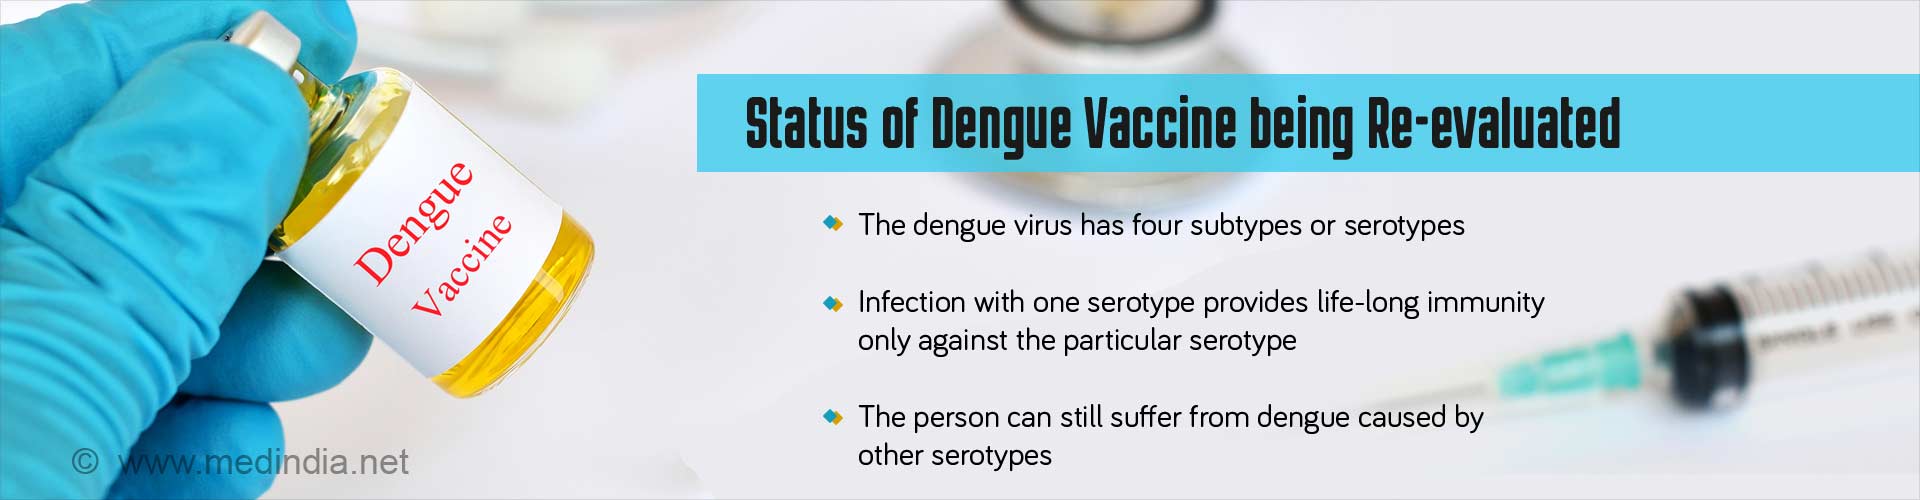 Status of dengue vaccine being re-evaluated
- the dengue virus has four subtypes or serotypes
- infections with one serotype provides life-long immunity only against the particular serotype
- the person can still suffer from dengue caused by serotypes